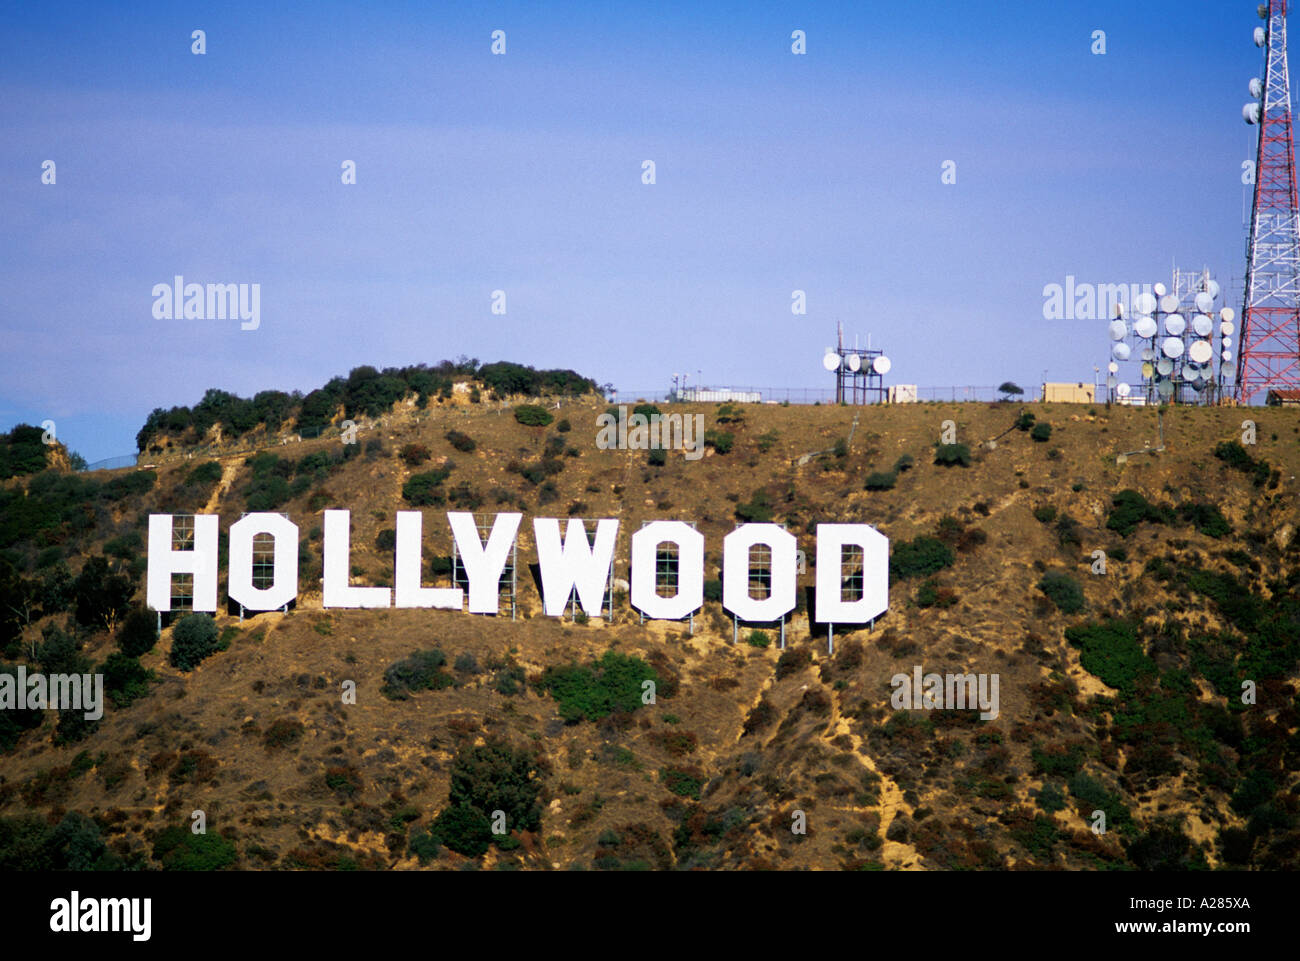 The Hollywood sign in Los Angeles, California. Stock Photo